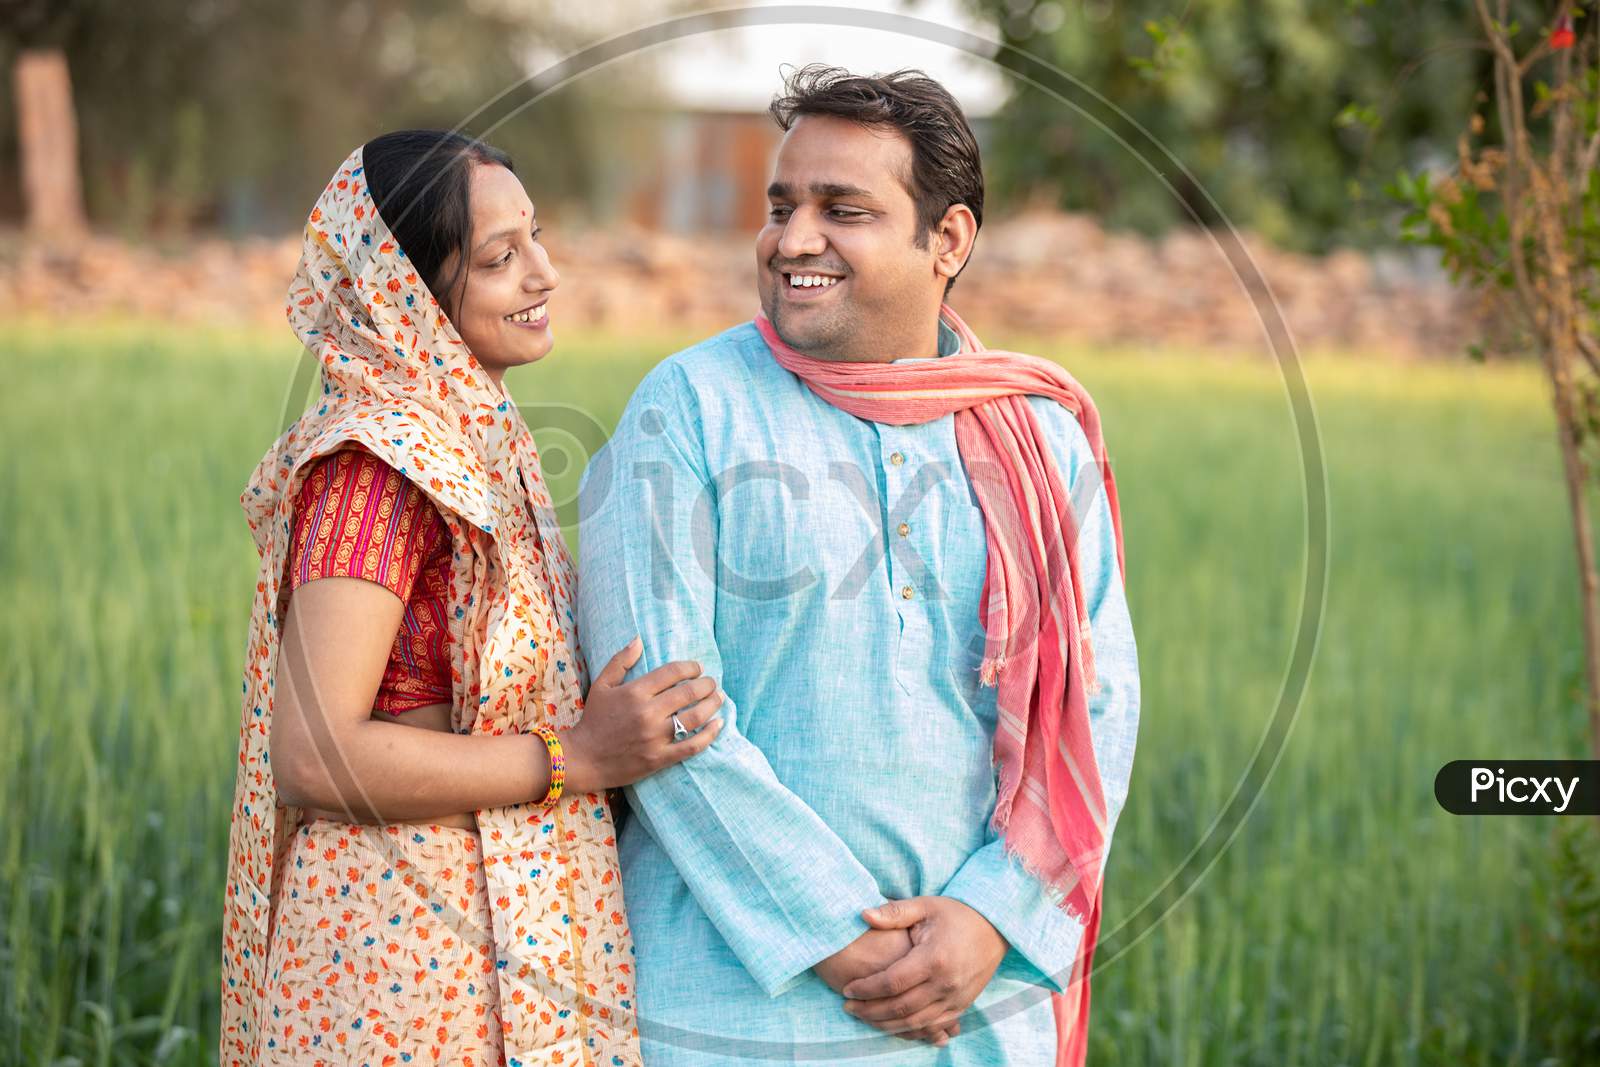 Happy Indian Rural Farmer Couple In Agricultural Field Looking At Each Other Laughing.